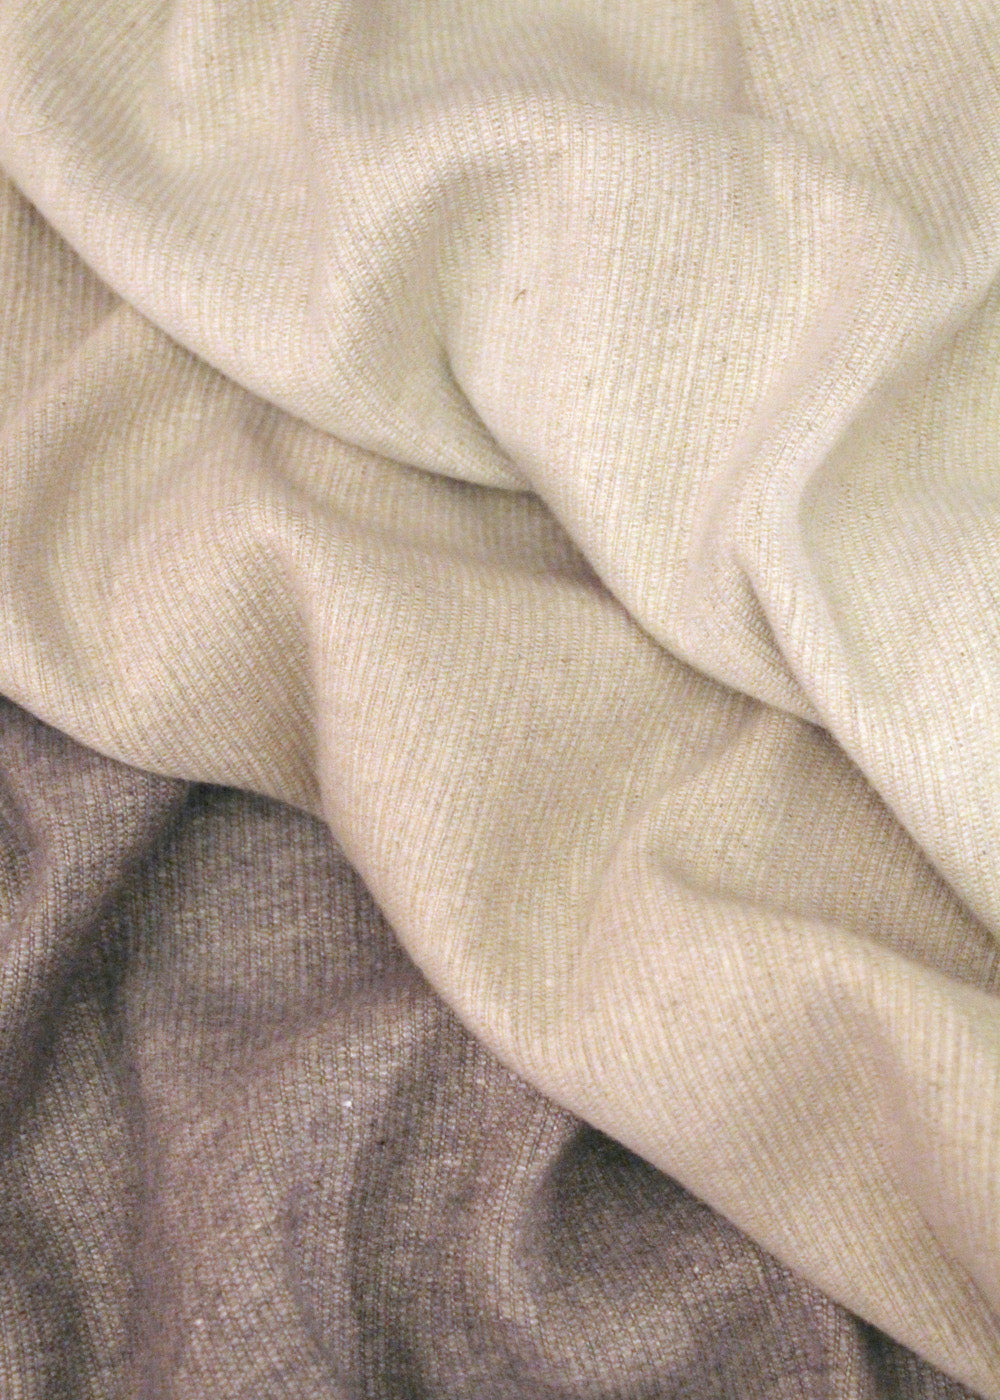 a soft crumpled cashmere upholstery fabric